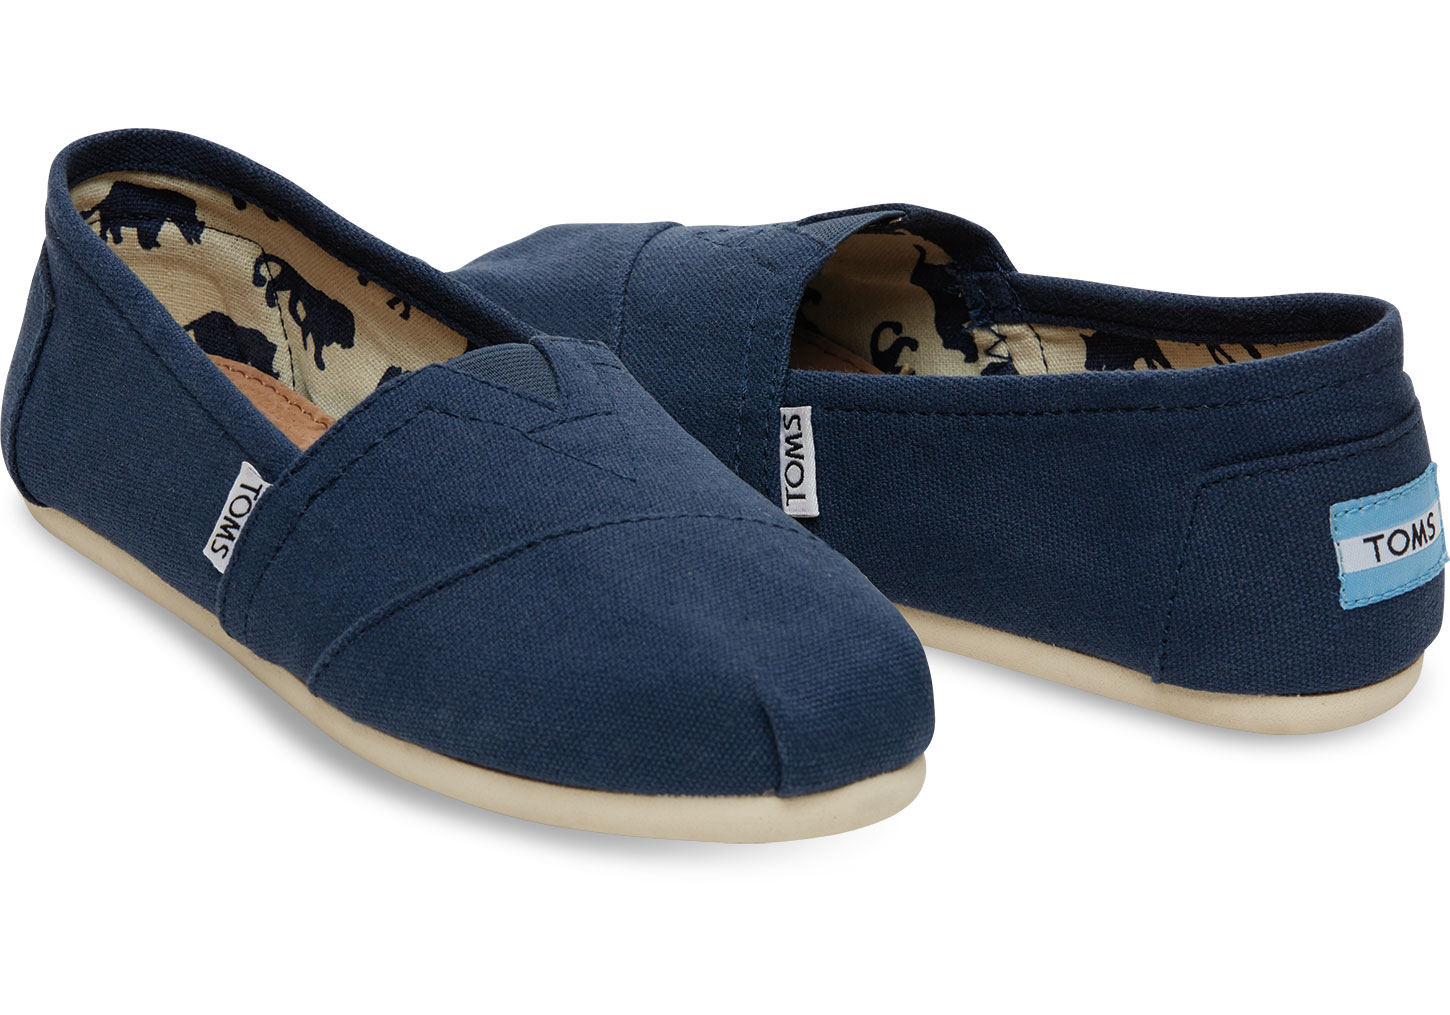 TOMS JUST LAUNCHED A HUGE VEGAN SPRING 